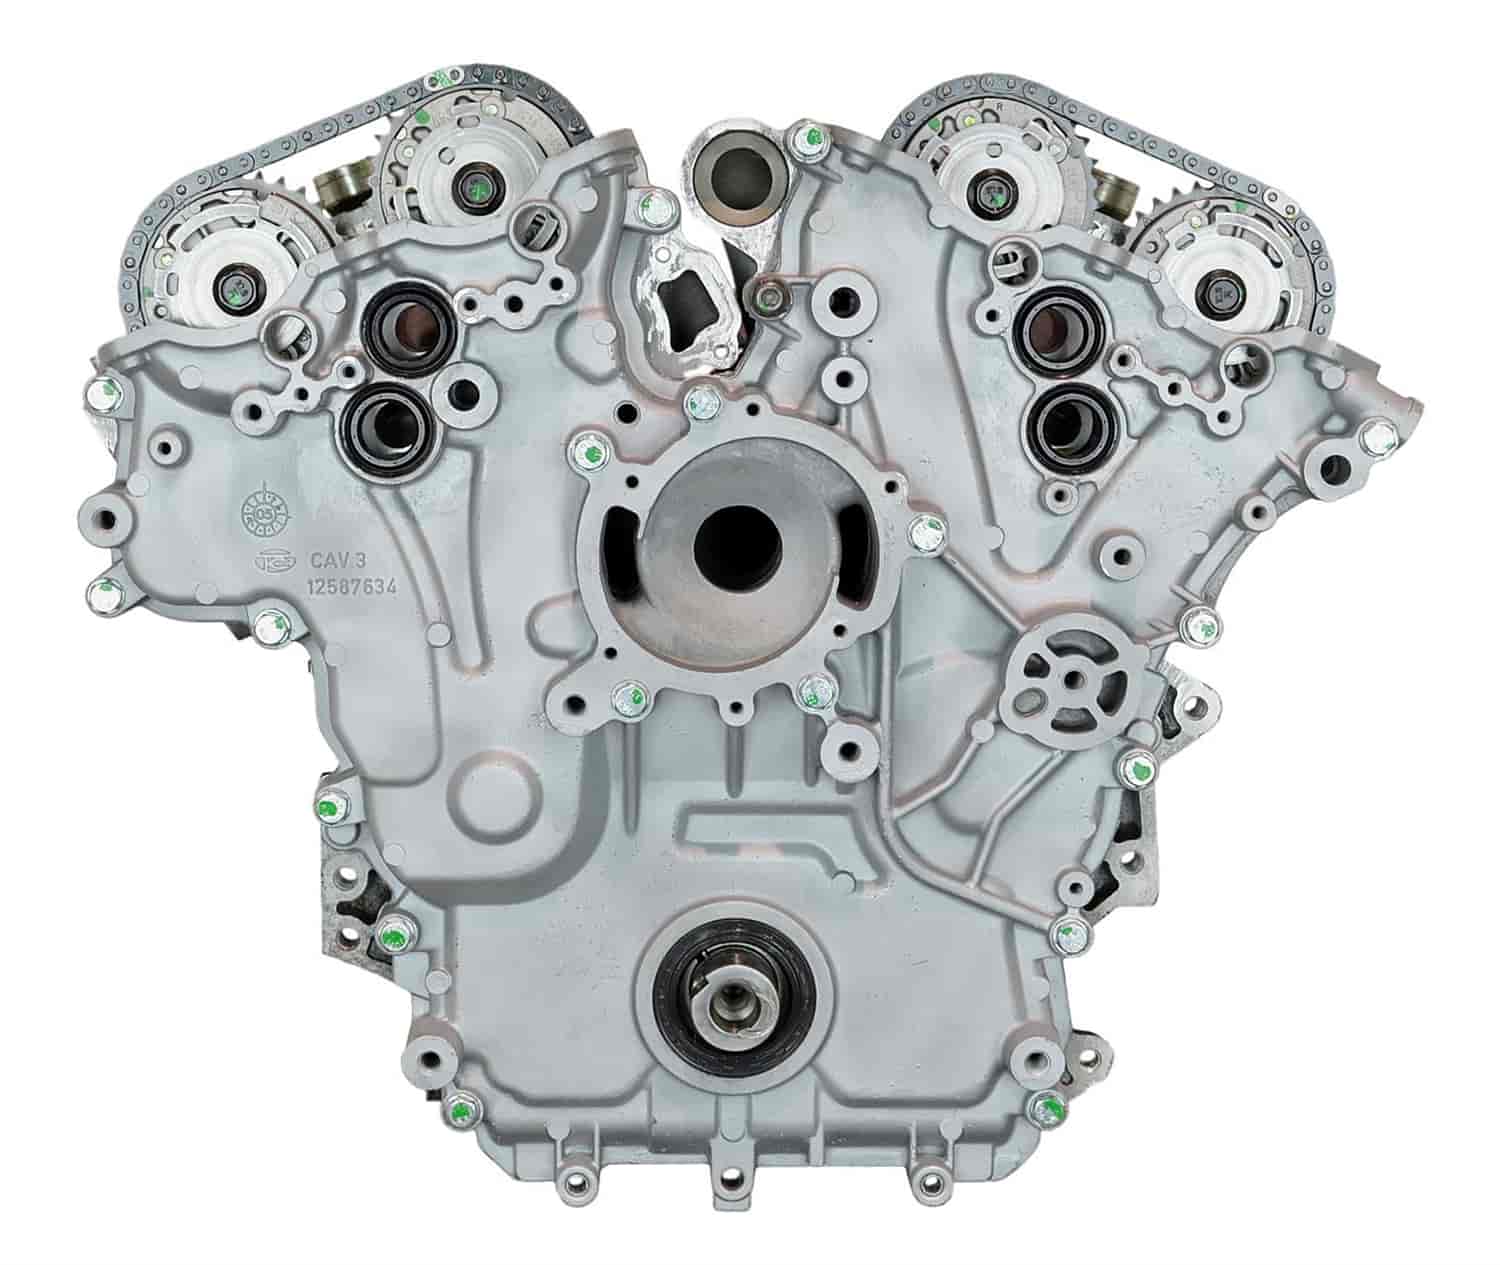 Remanufactured Crate Engine for 2004-2006 Cadillac CTS, SRX,